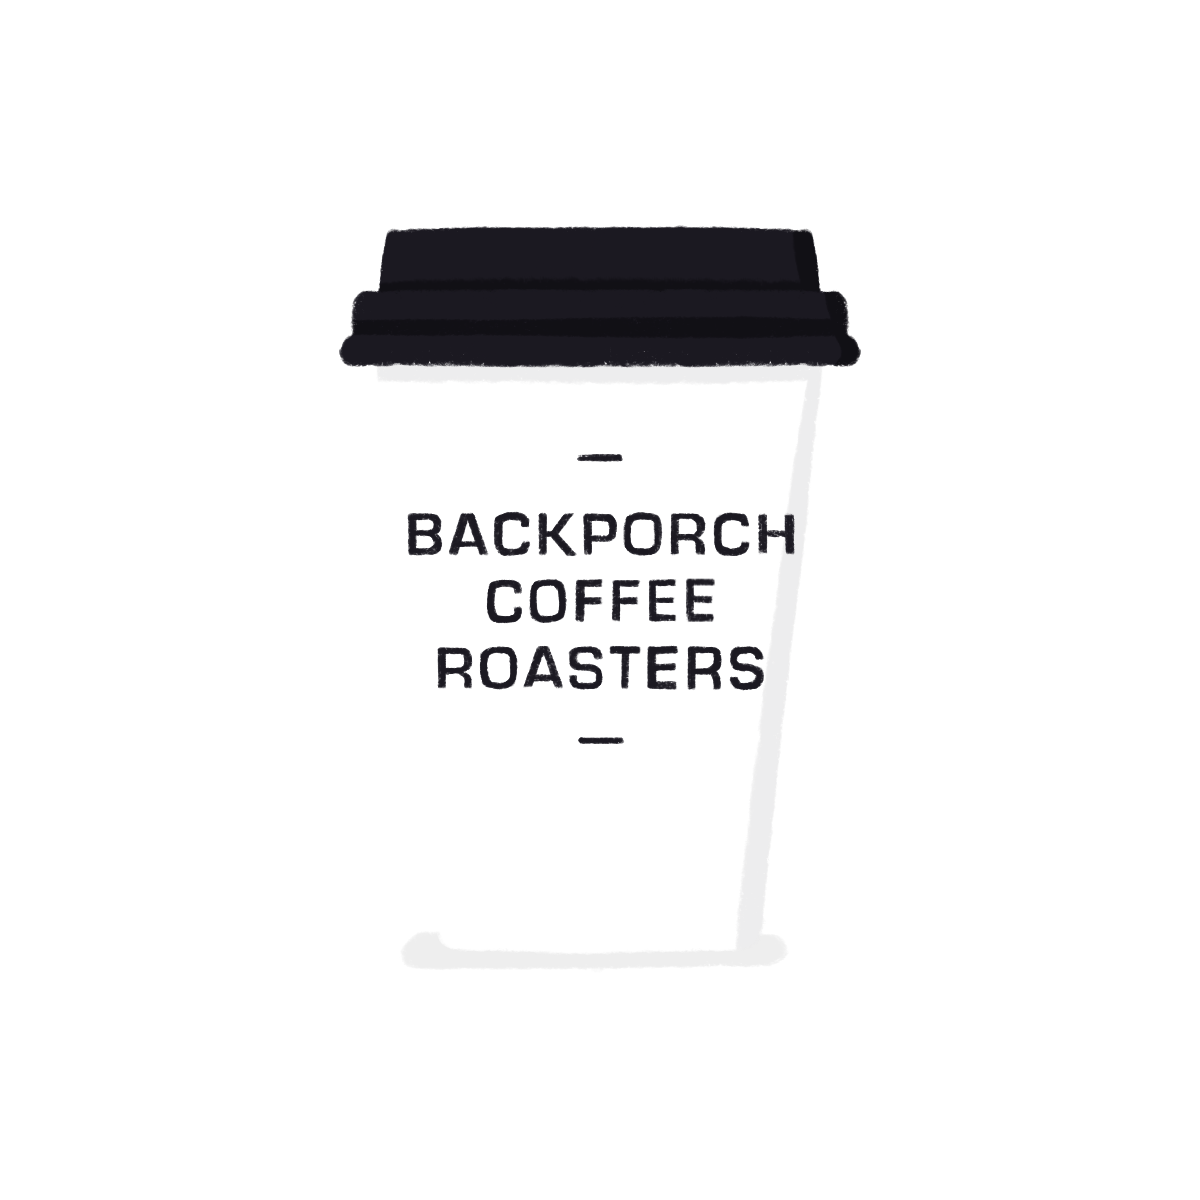 Backporch Coffee Roasters coffee cup